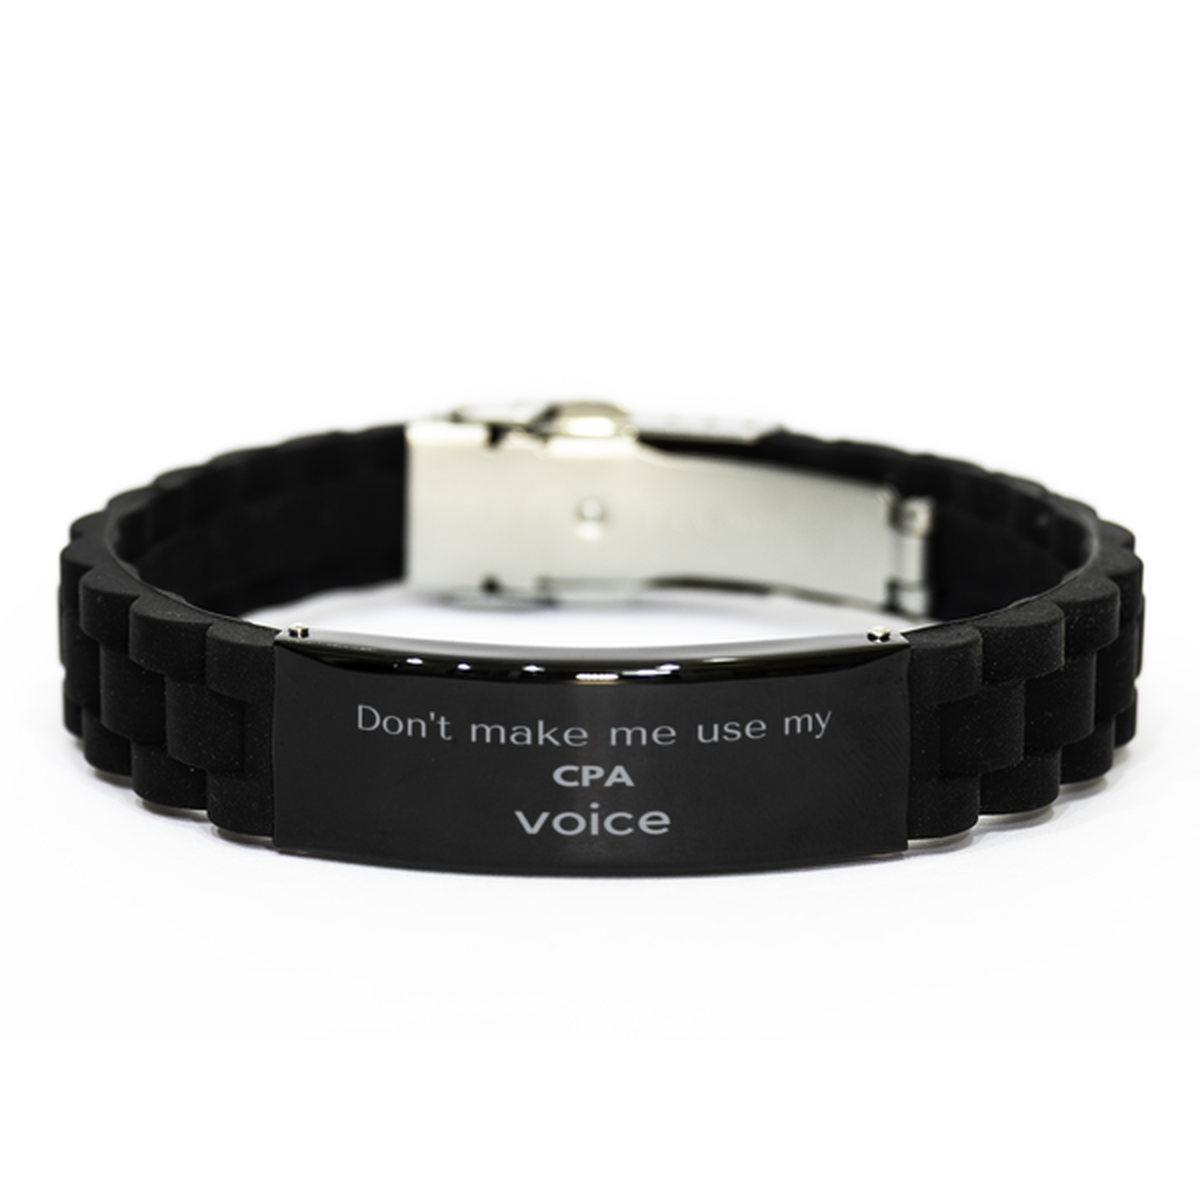 Don't make me use my CPA voice, Sarcasm CPA Gifts, Christmas CPA Black Glidelock Clasp Bracelet Birthday Unique Gifts For CPA Coworkers, Men, Women, Colleague, Friends